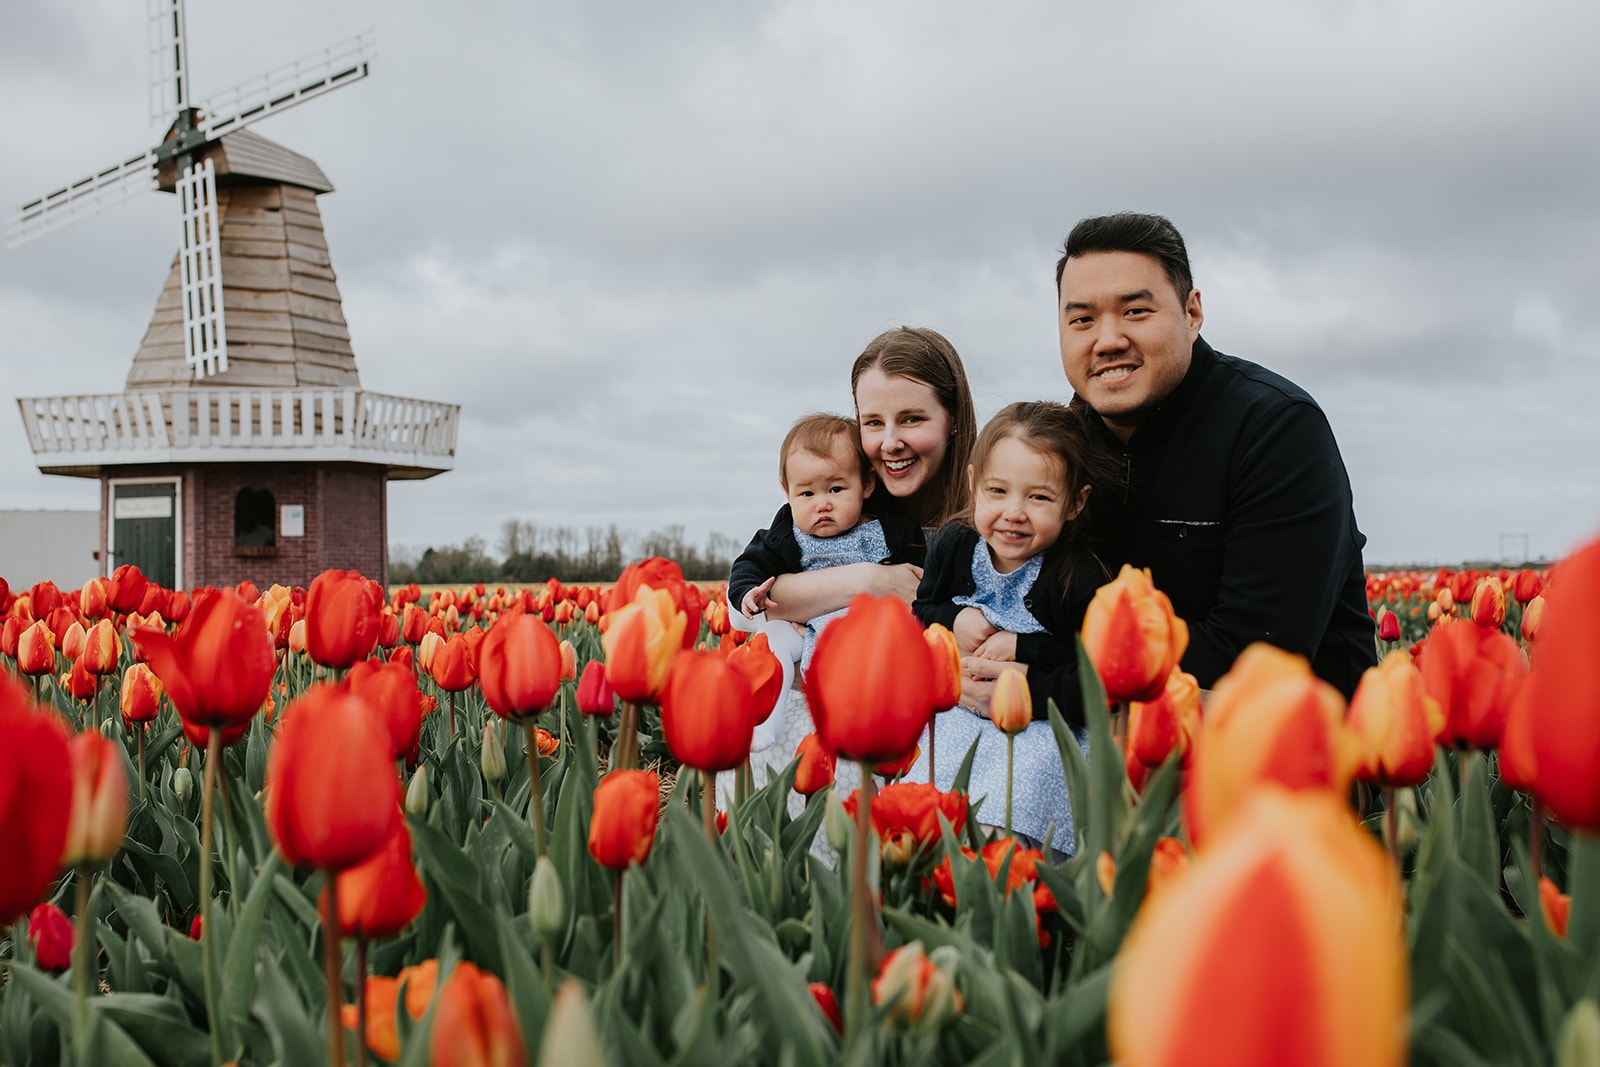 Family photoshoot at the tulip fields